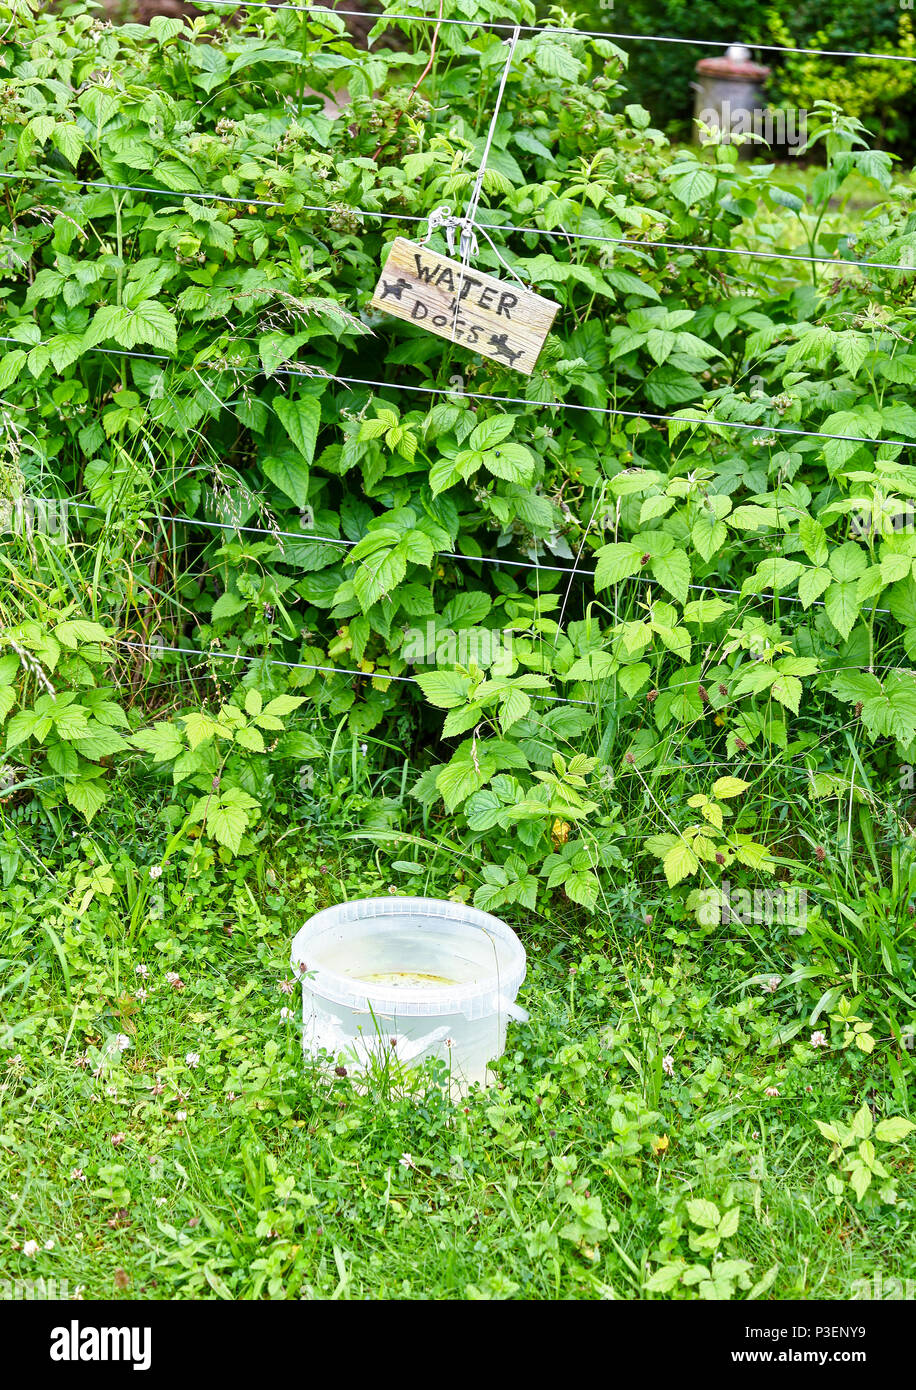 A bowl of water for dogs to drink and a sign saying 'water for dogs' Manifold Valley, Staffordshire, England, UK Stock Photo